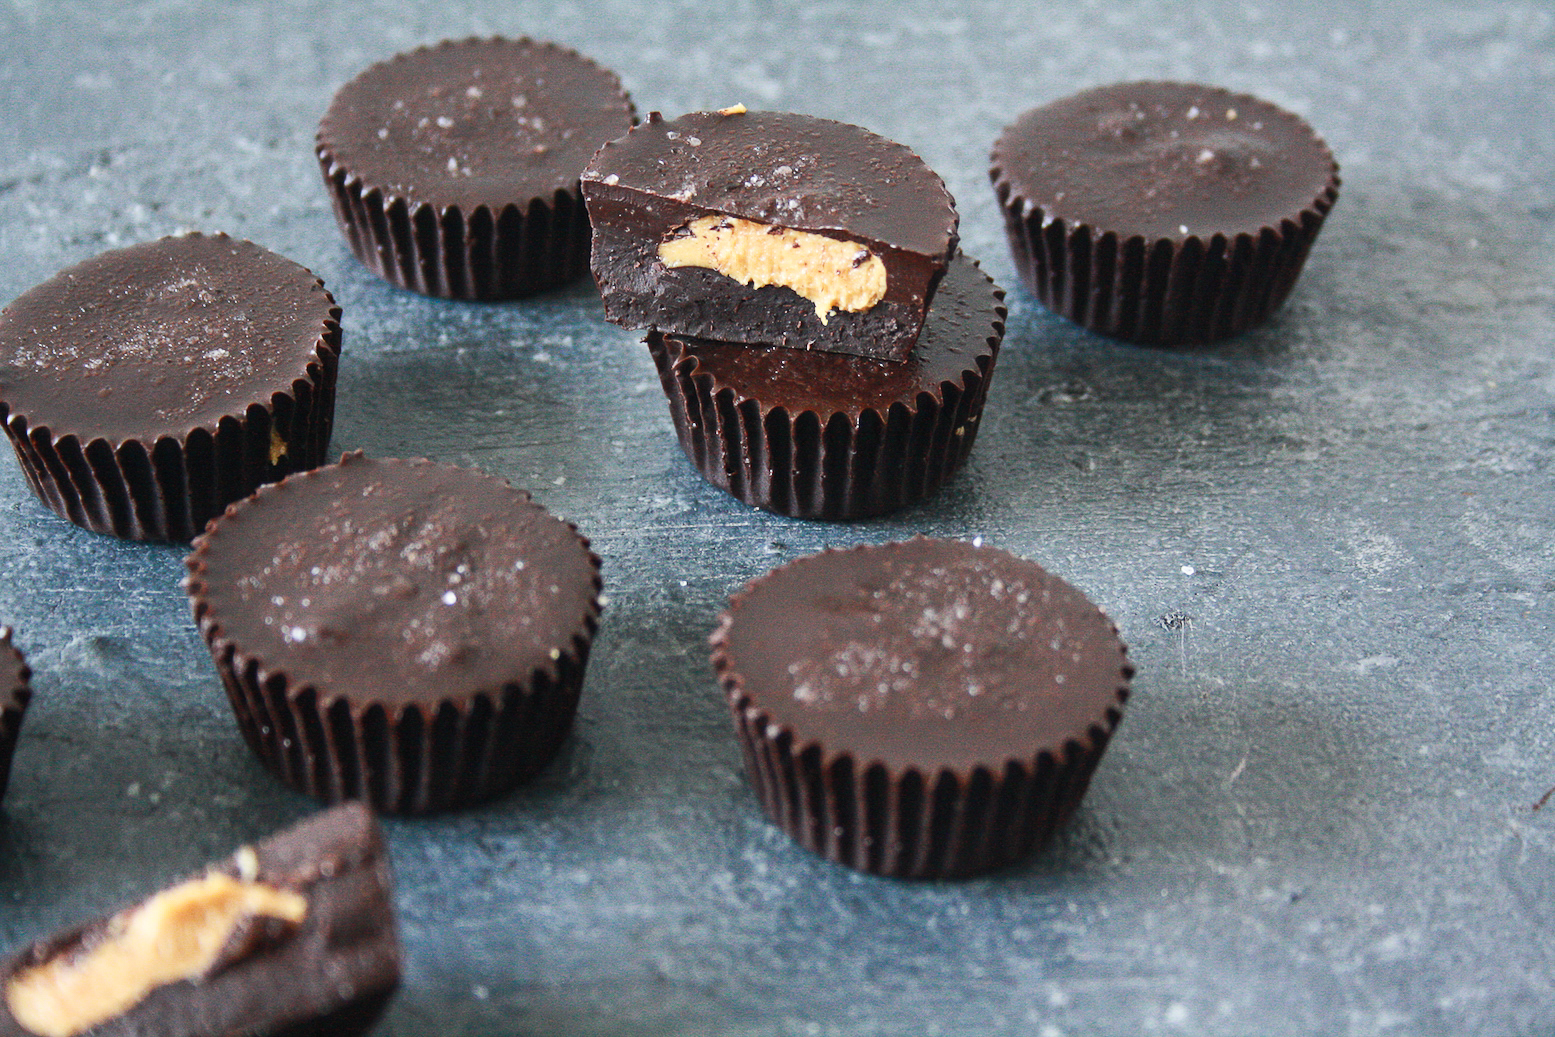 Homemade, super easy peanut butter cups with dark chocolate!